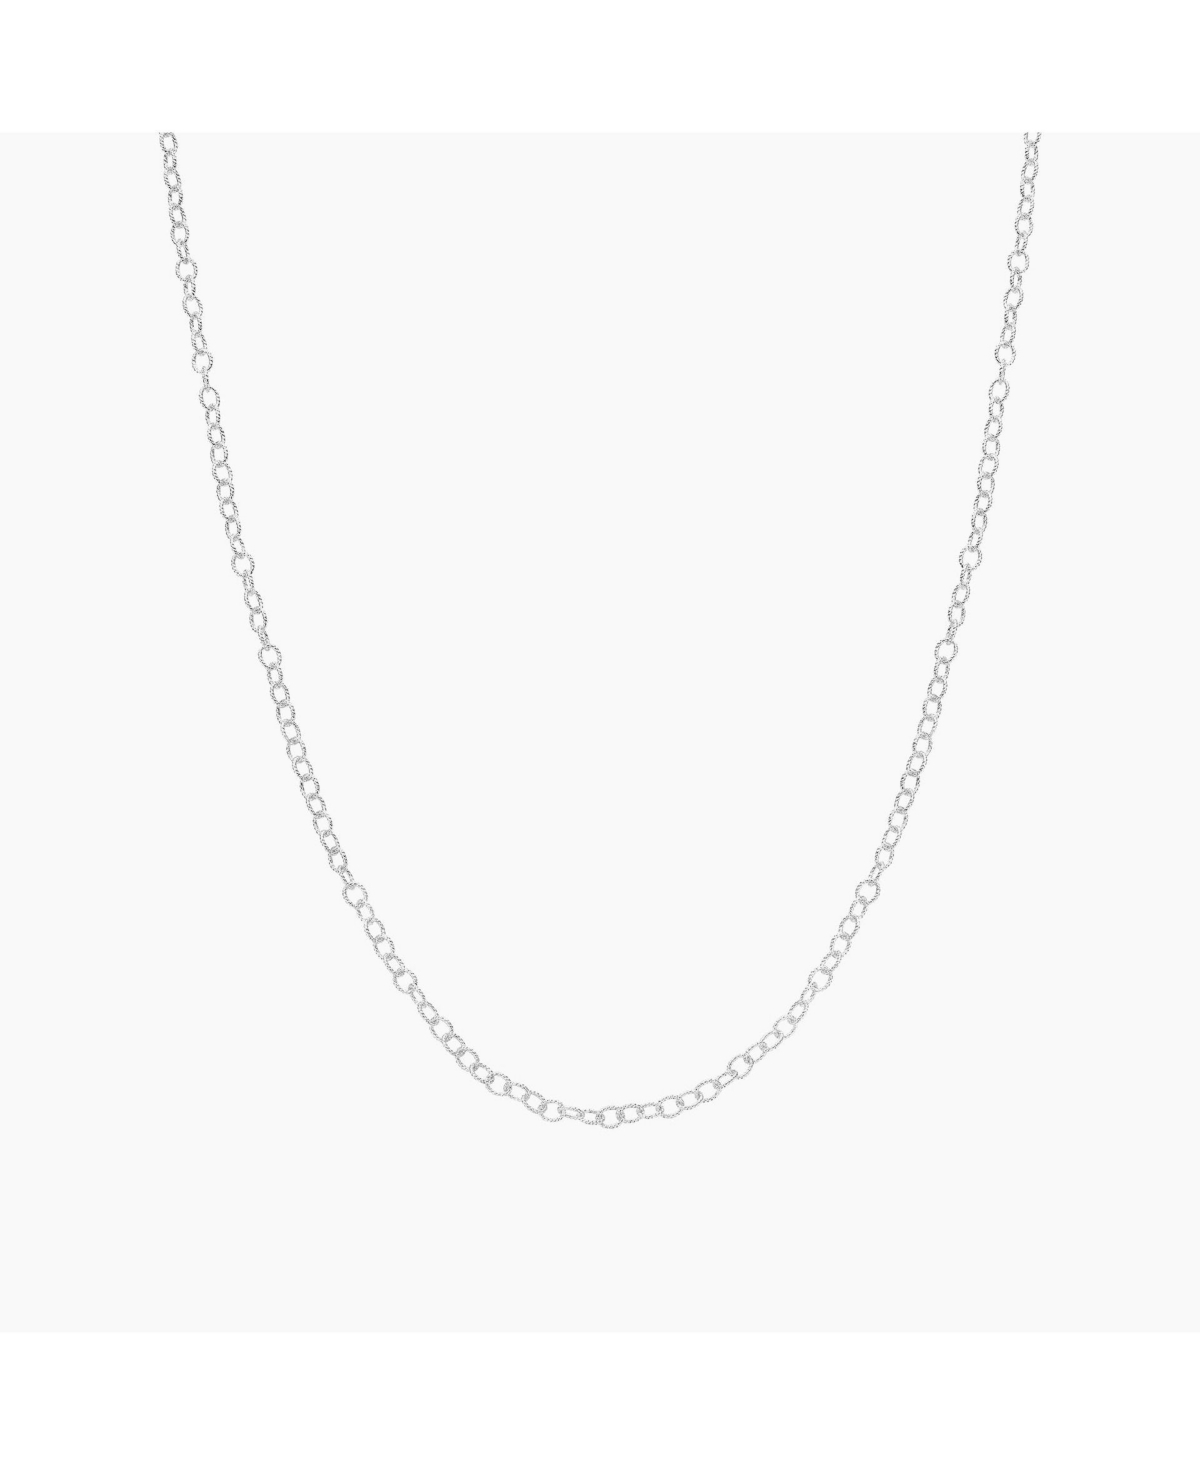 Lizzy Small Chain Necklace - Silver